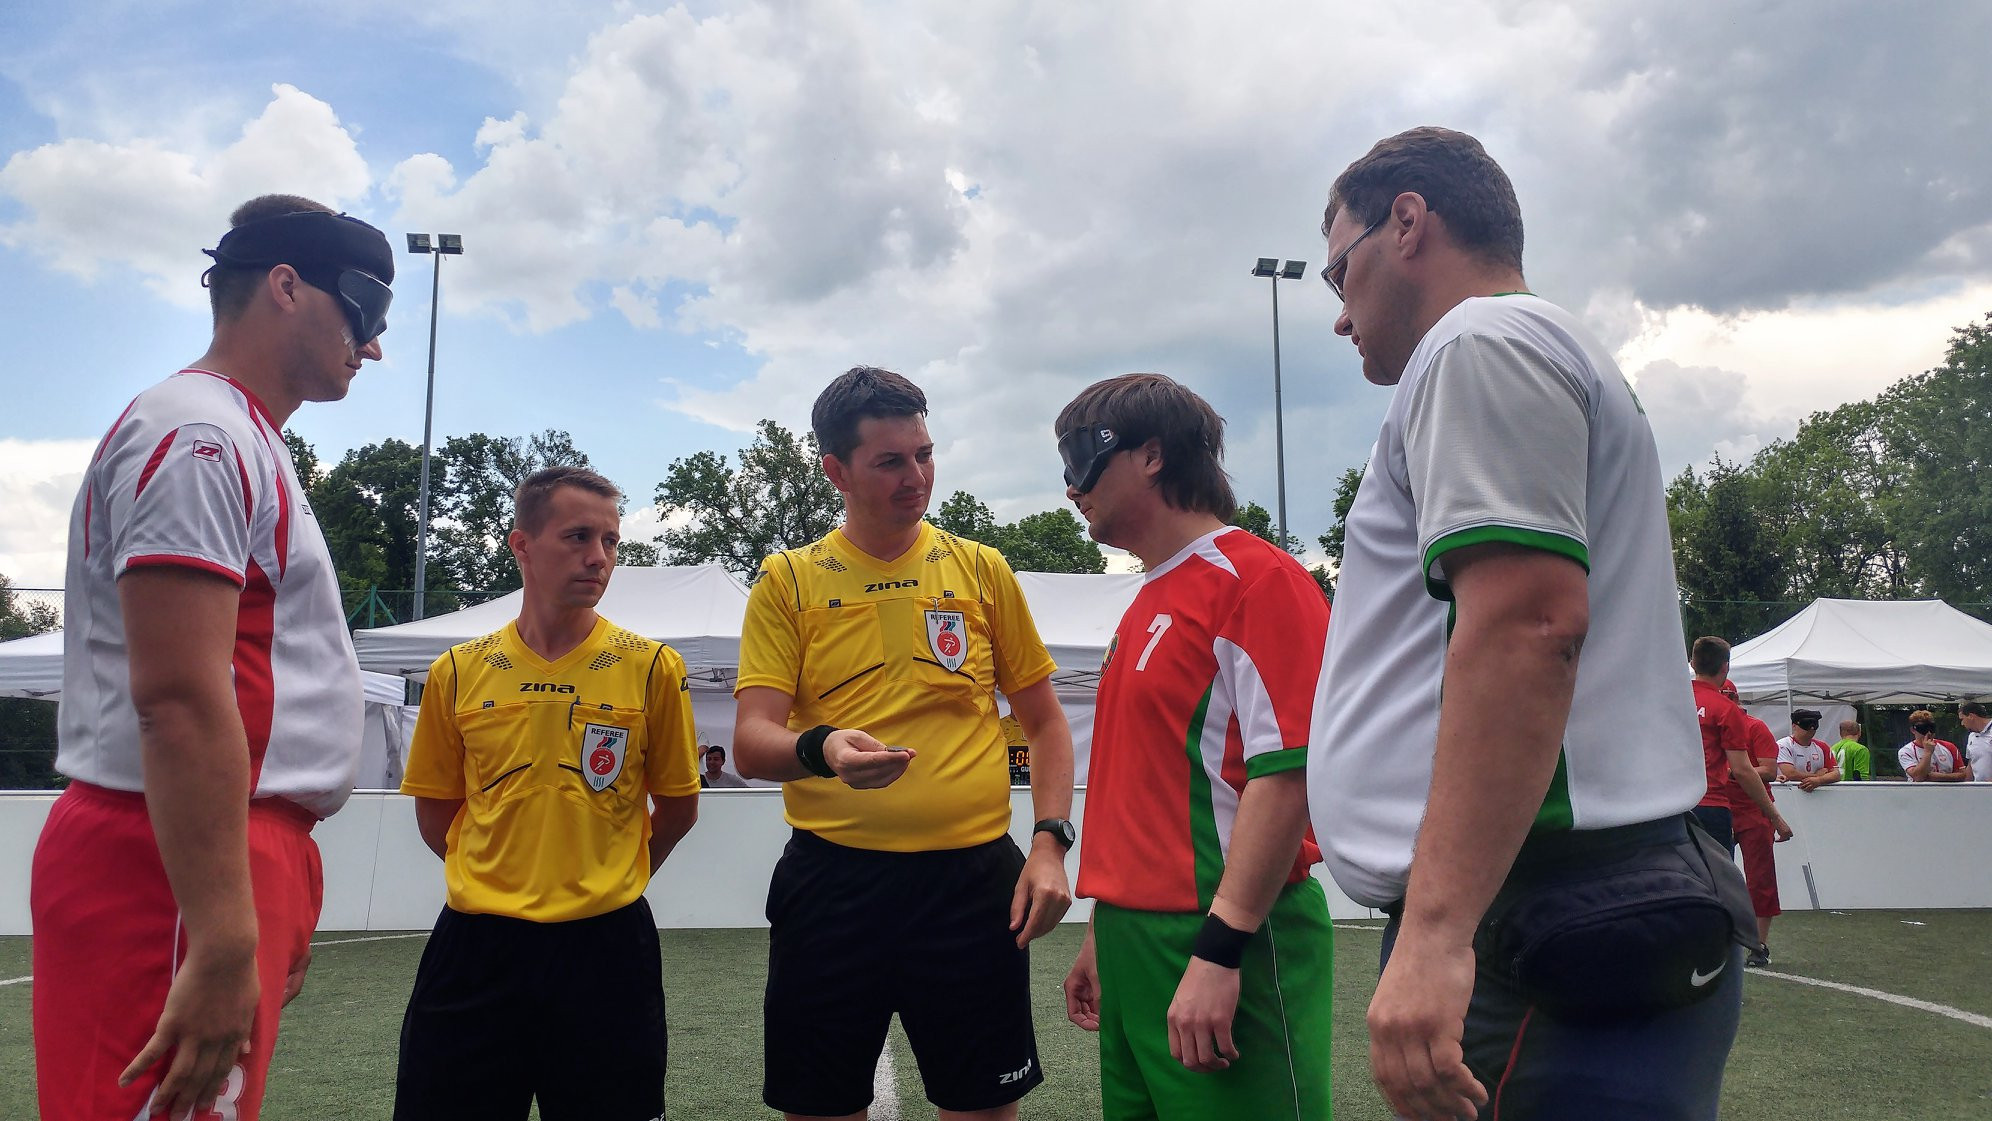 Poland and Ireland to meet in final of Blind Football Euro Challenge Cup